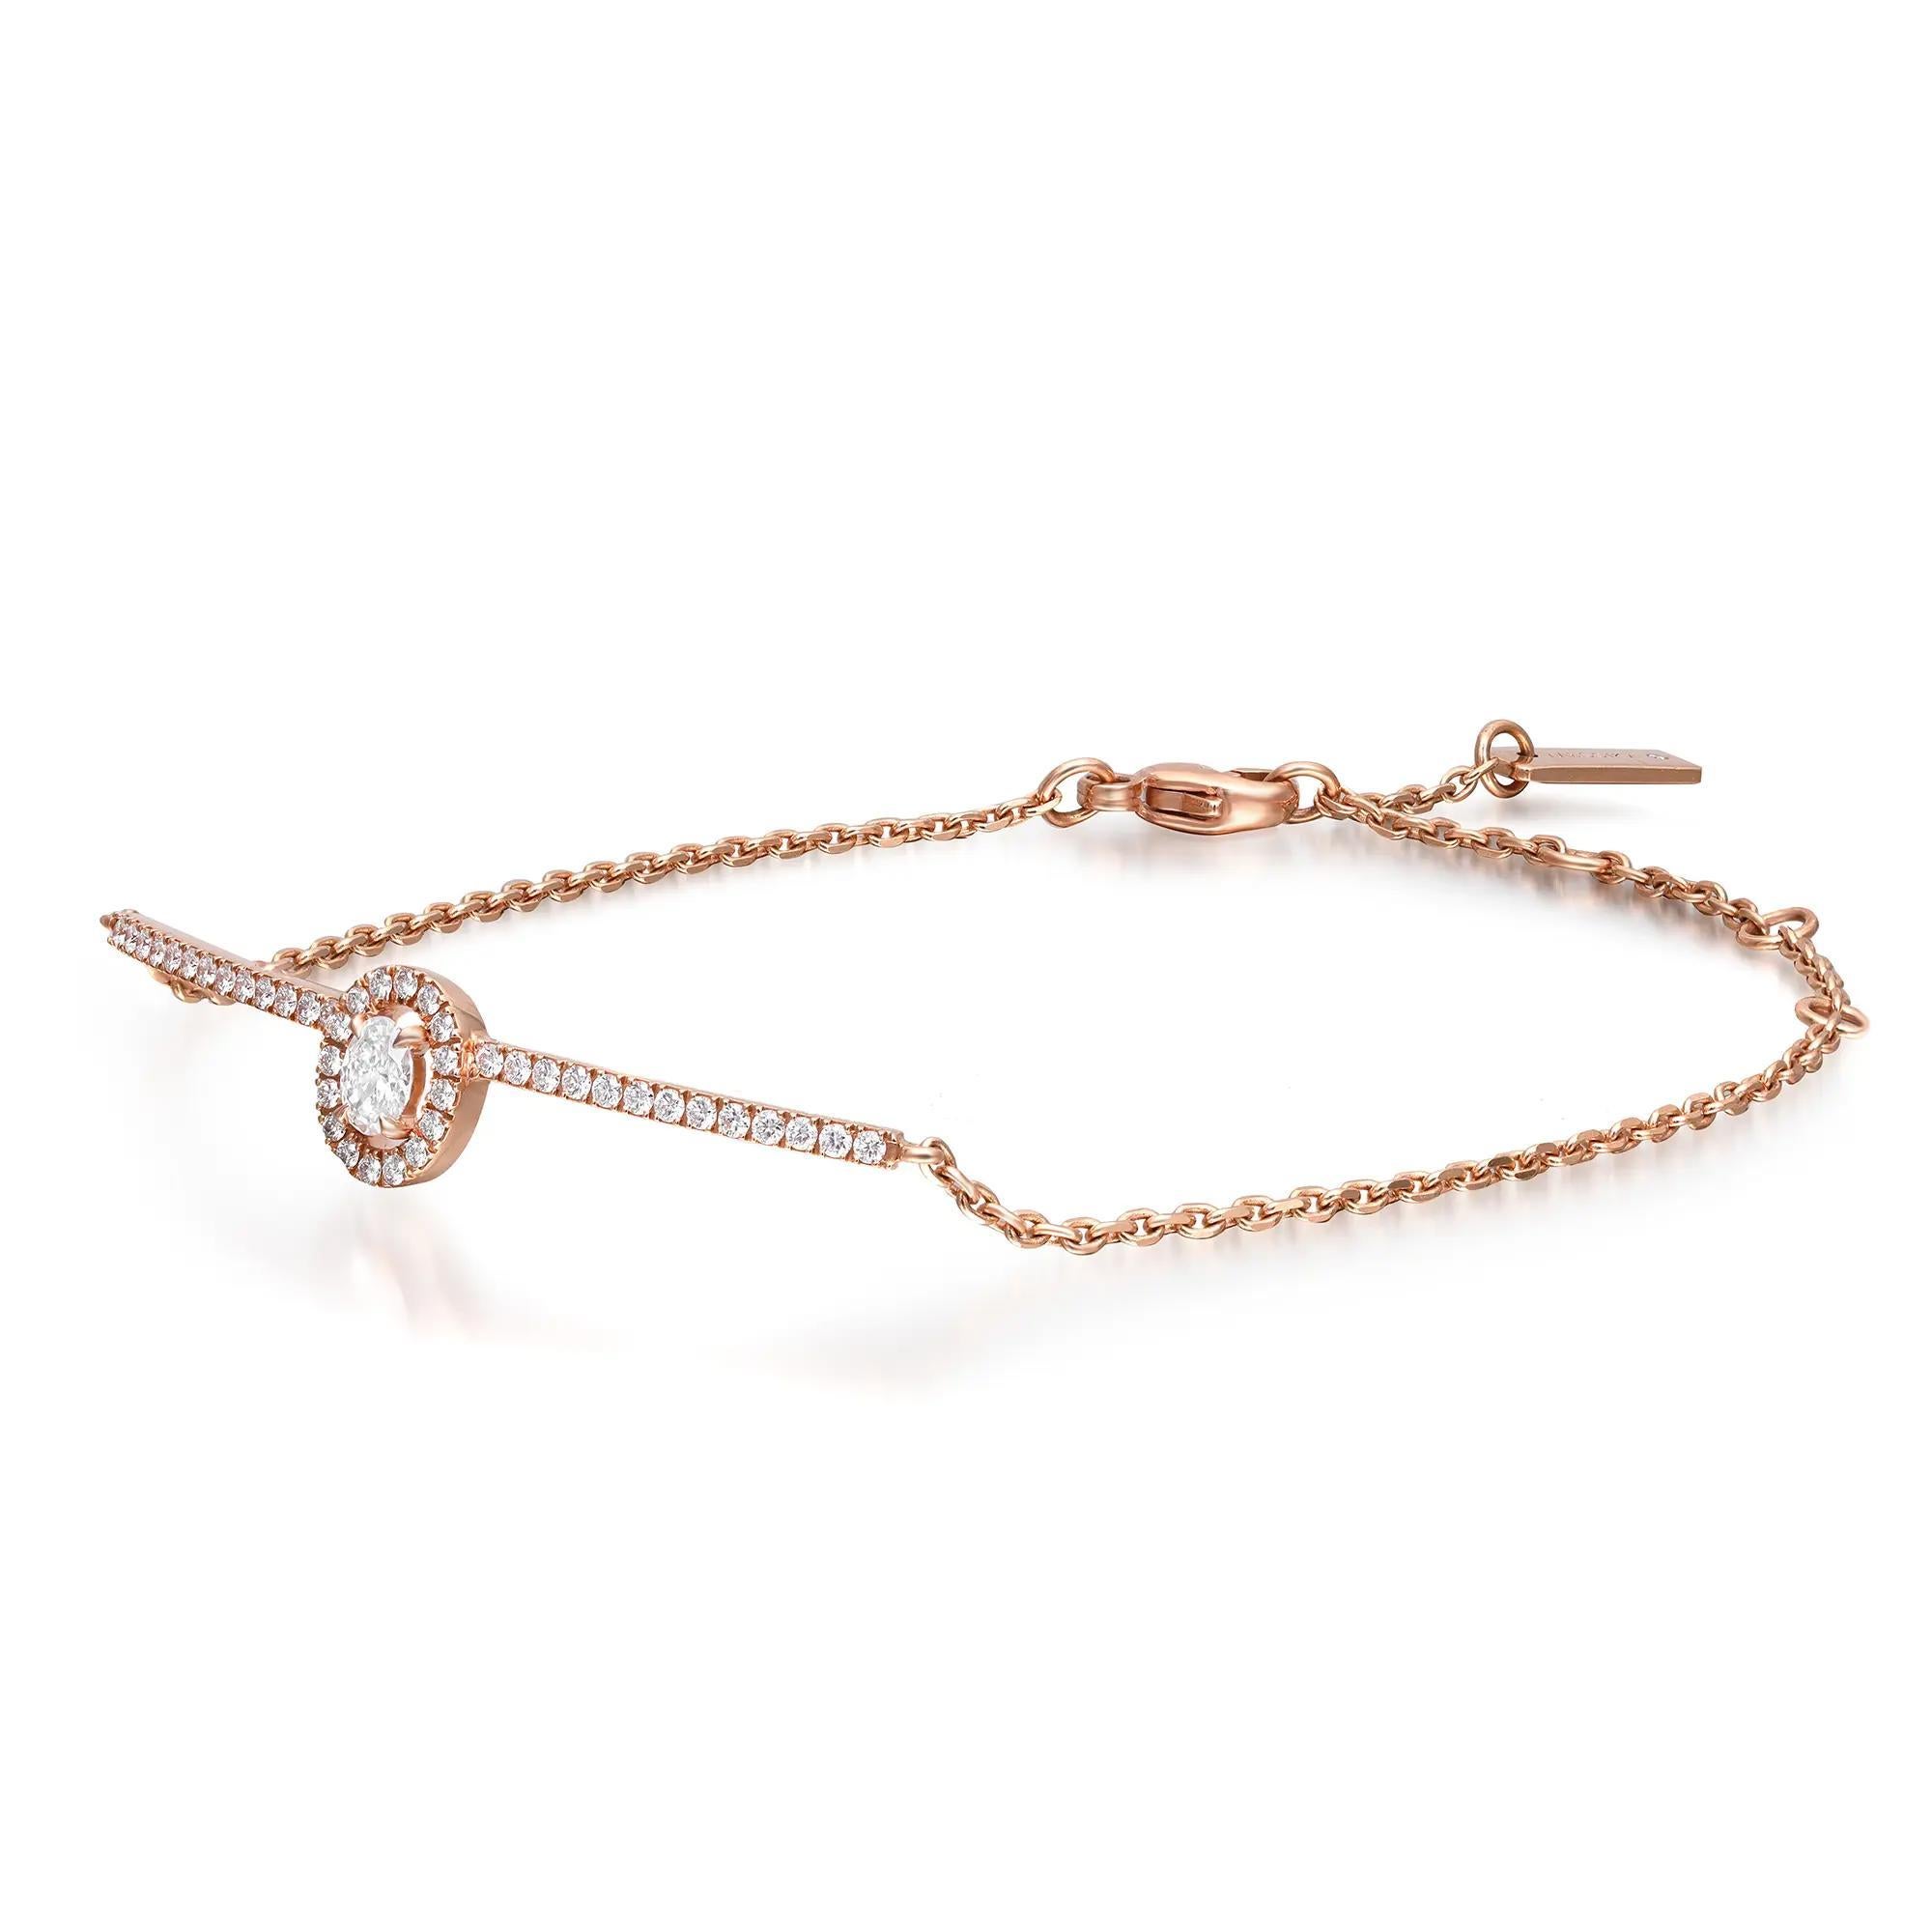 Taille ovale Messika 0.36Cttw Glam'Azone Diamond Chain Bracelet 18K Rose Gold 7.5 Inches en vente